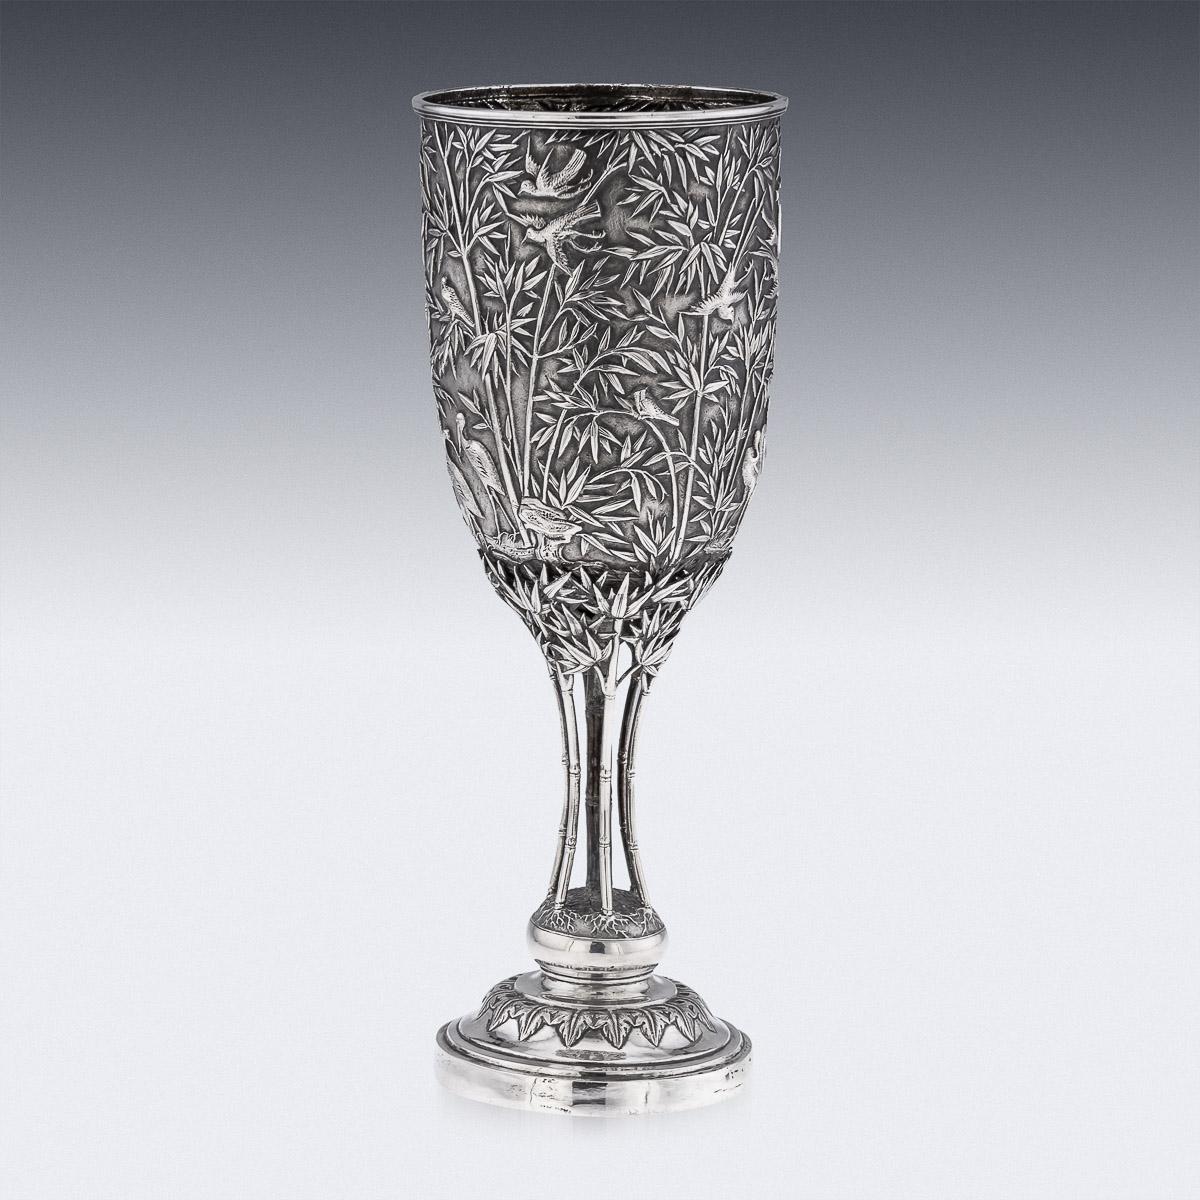 19th Century Chinese Export Solid Silver Goblet, Leeching, c.1870 For Sale 2